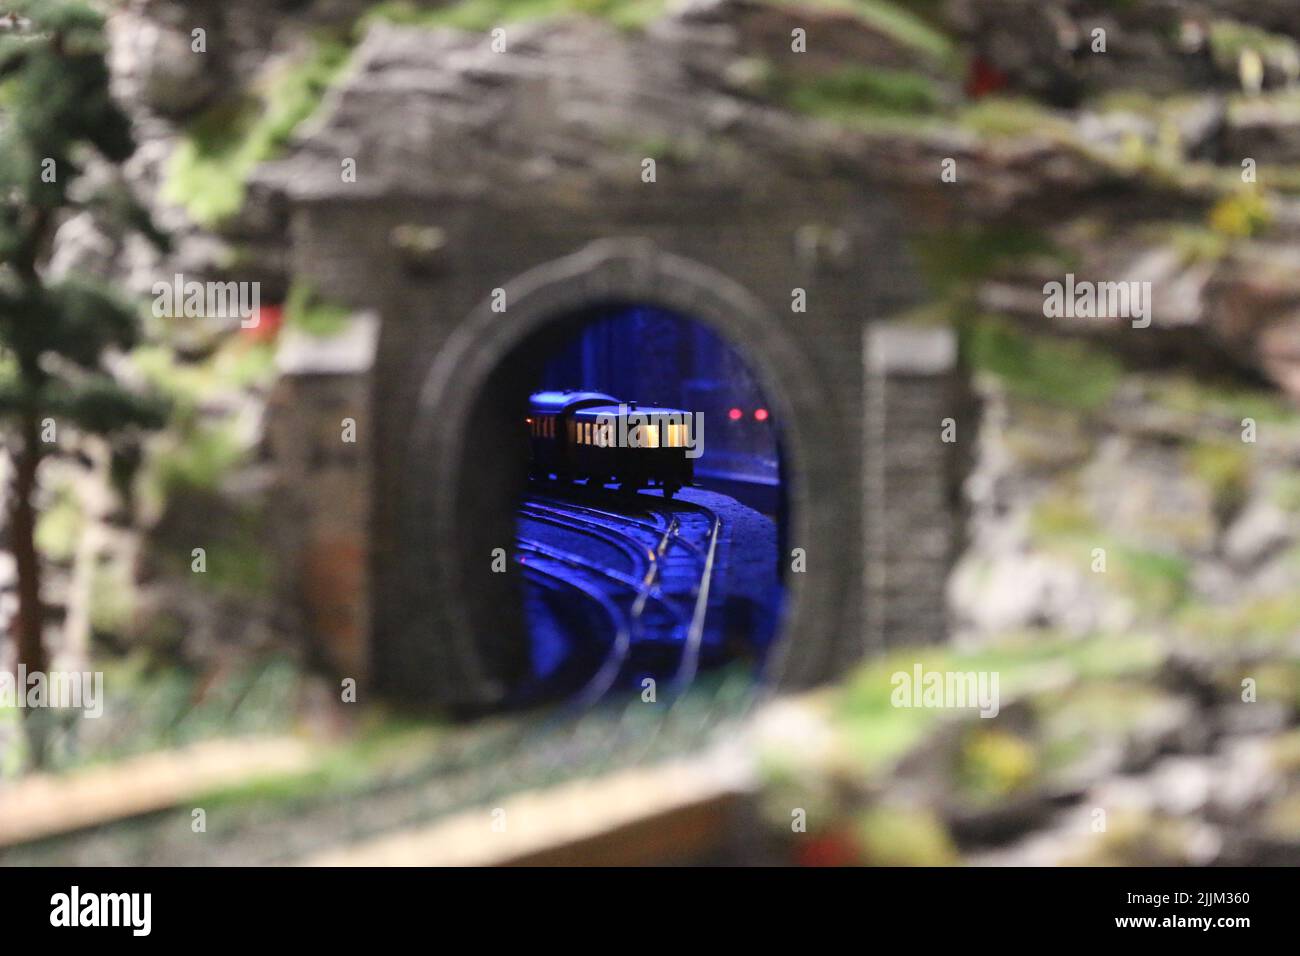 A selective focus shot of a miniature train coming out of a railway tunnel in the 'Miniatur Wunderland' museum, Hamburg, Germany Stock Photo